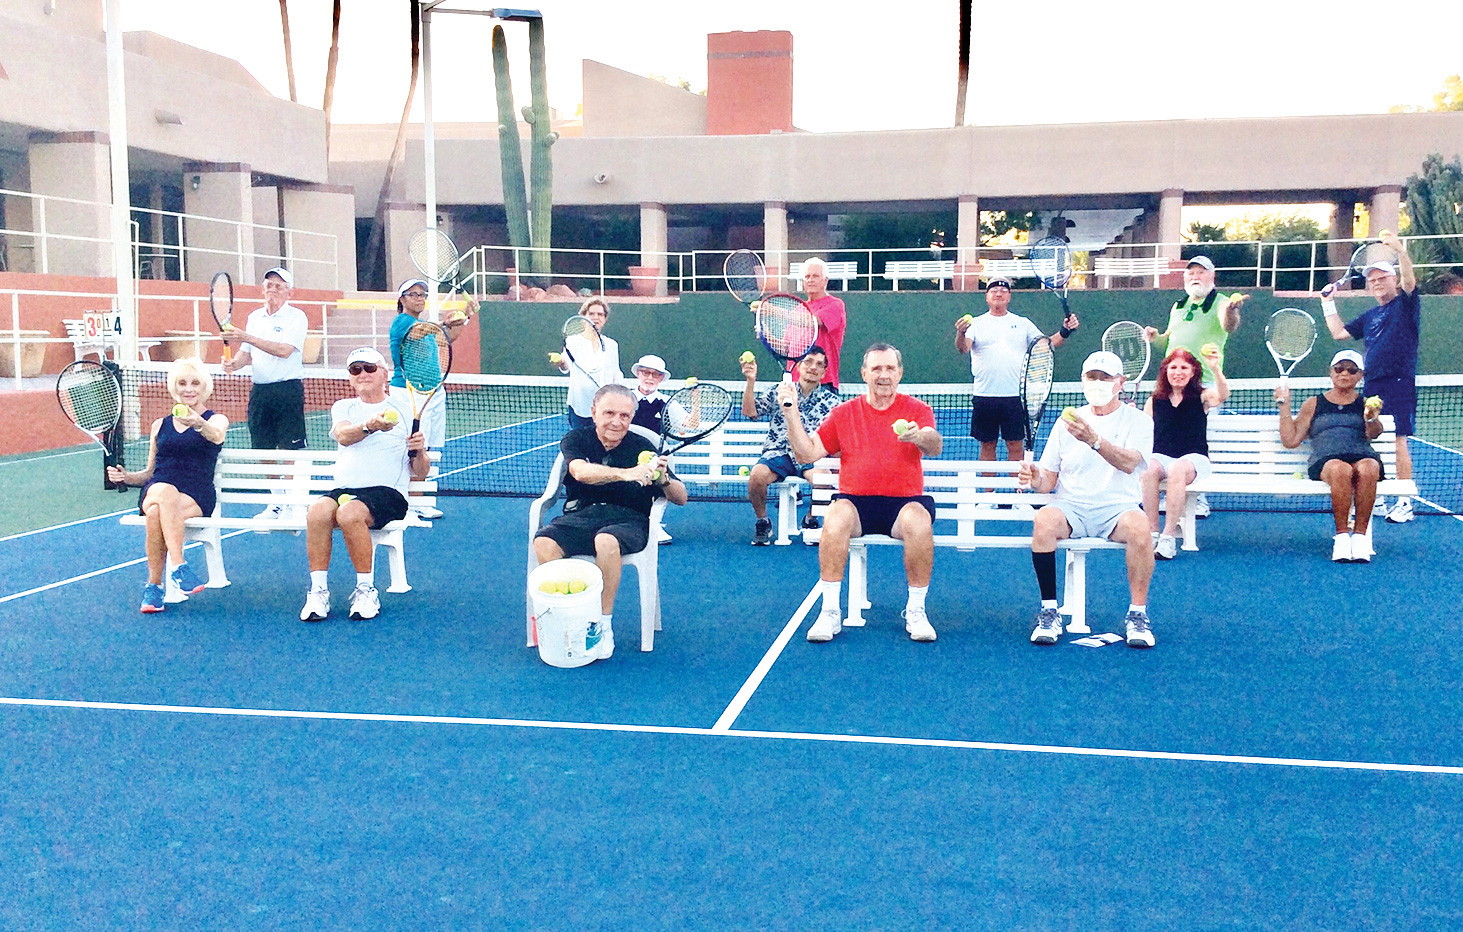 Teachers and students prepare for Cottonwood's free tennis clinics. Front row (seated): Karen Daugherty, Les Schick, Pierre Moresi (director with bucket of balls), Jerry Higgns, and Jim Southerland; second row (seated): Dick Kane, Joseph Fleming, Bonnie DeGrenier, and Sonda Giles; standing (left to right): Al Wagner (instructor), Ollie Johnson, Lucia Fleming, Cannon Hill, Jack Veit, John Arhangelsky, and Ken Griffin